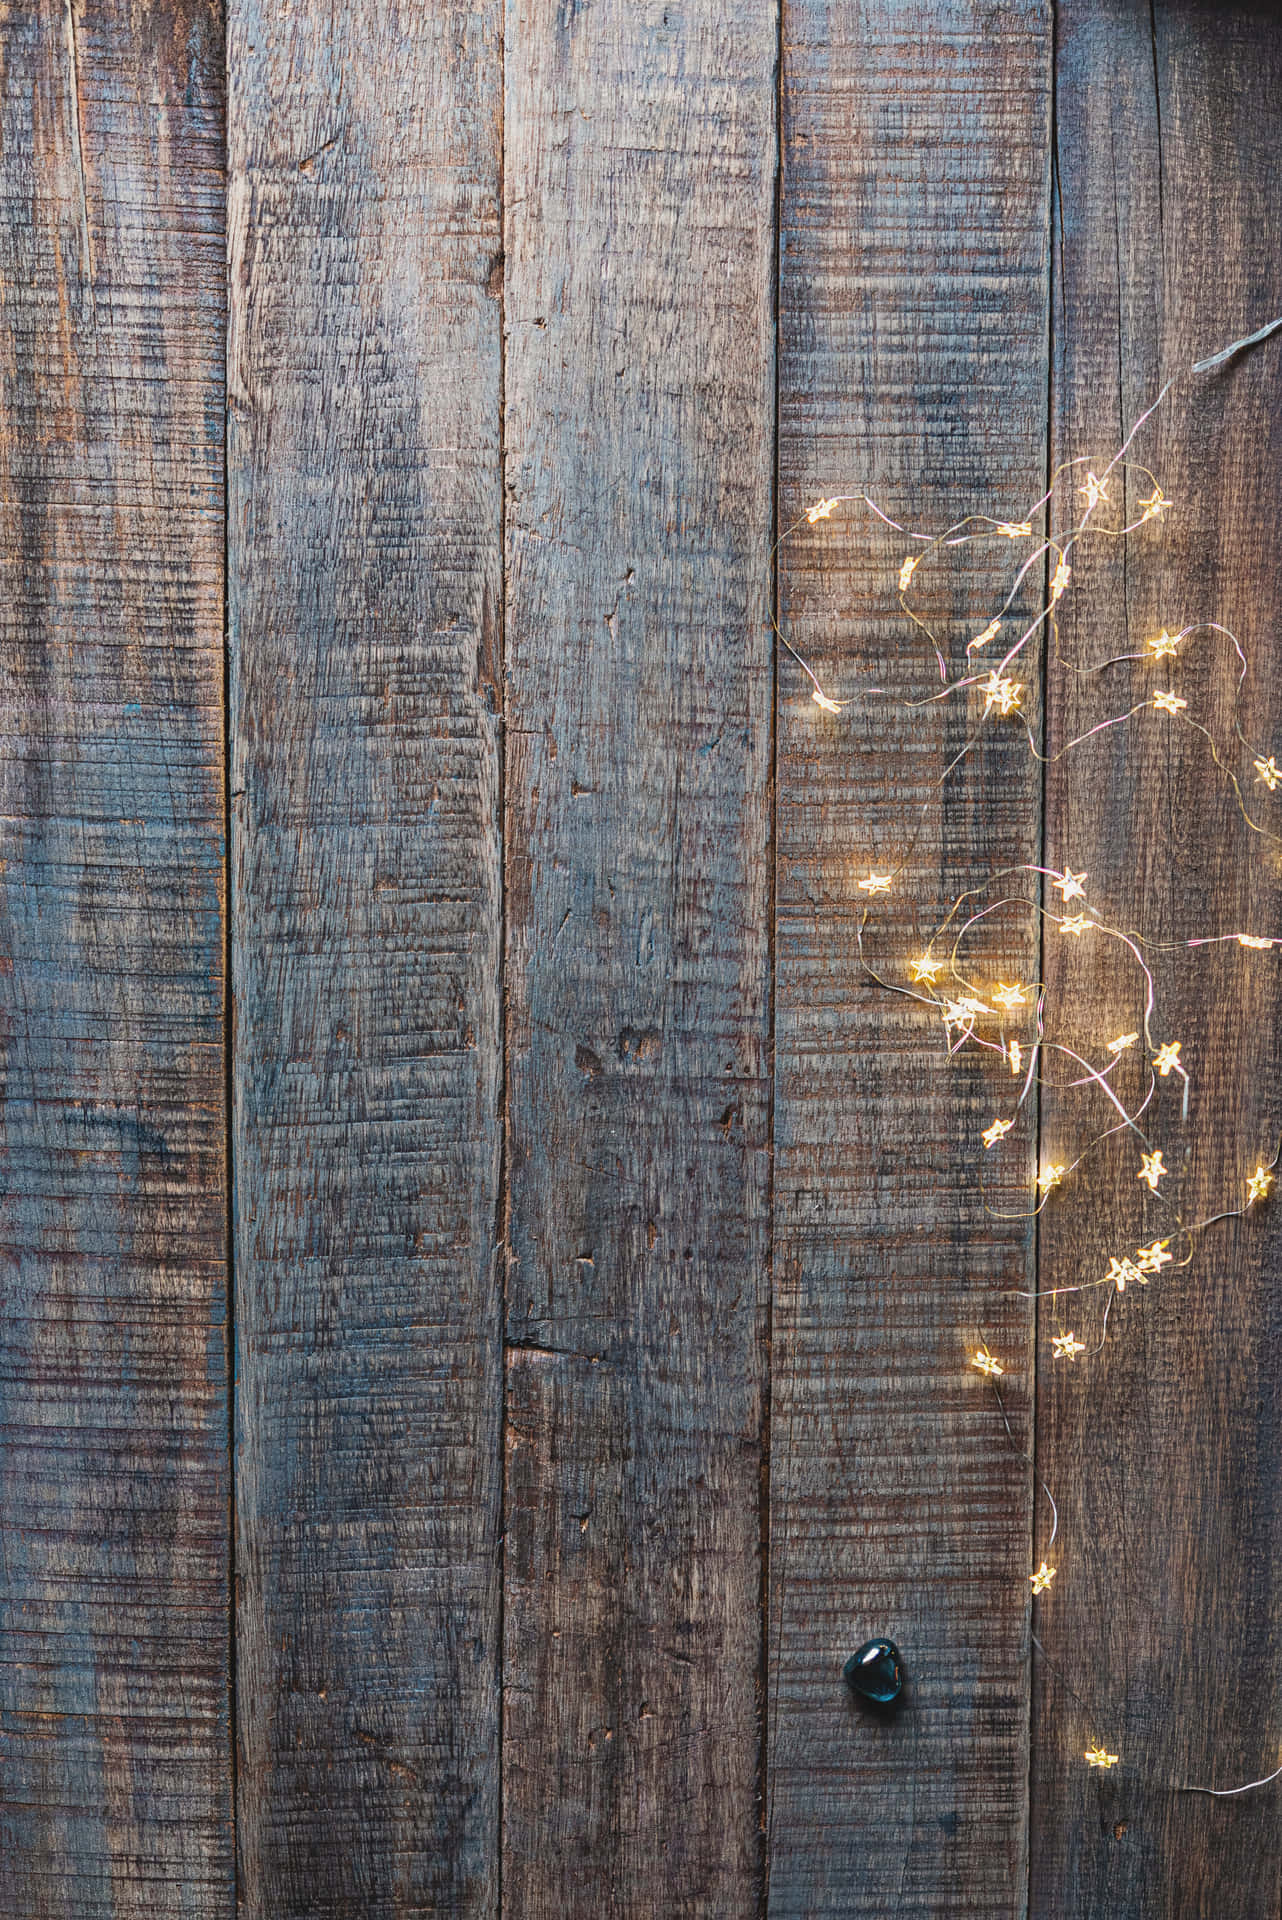 Vintage Barn Wood With Decorative Lights Wooden Background Wallpaper